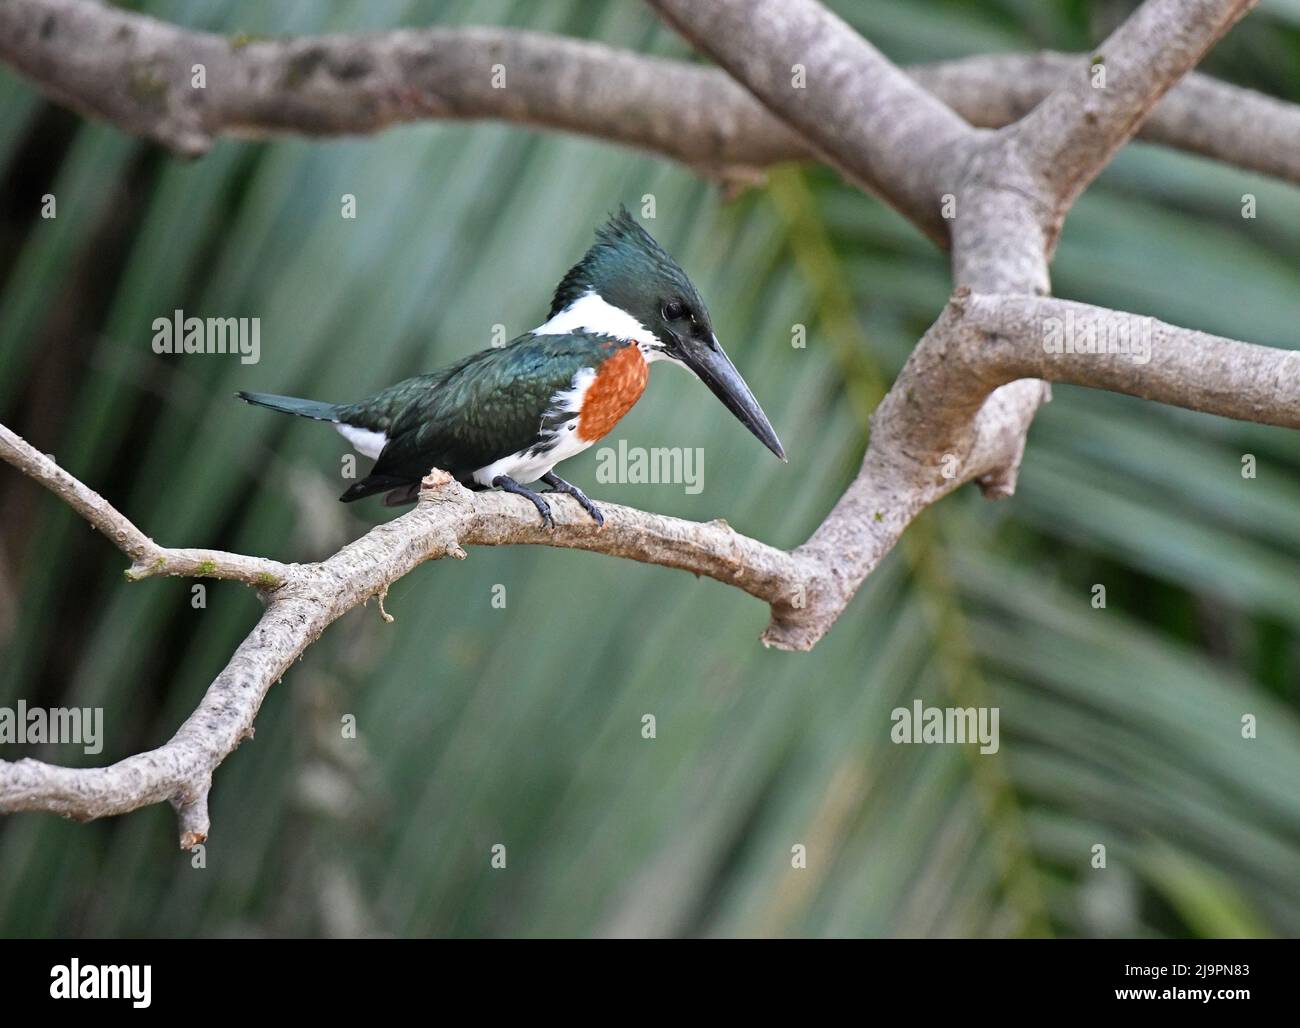 Green kingfisher (Chloroceryle americana), sitting on a branch above the water in a forest, Costa Rica Stock Photo